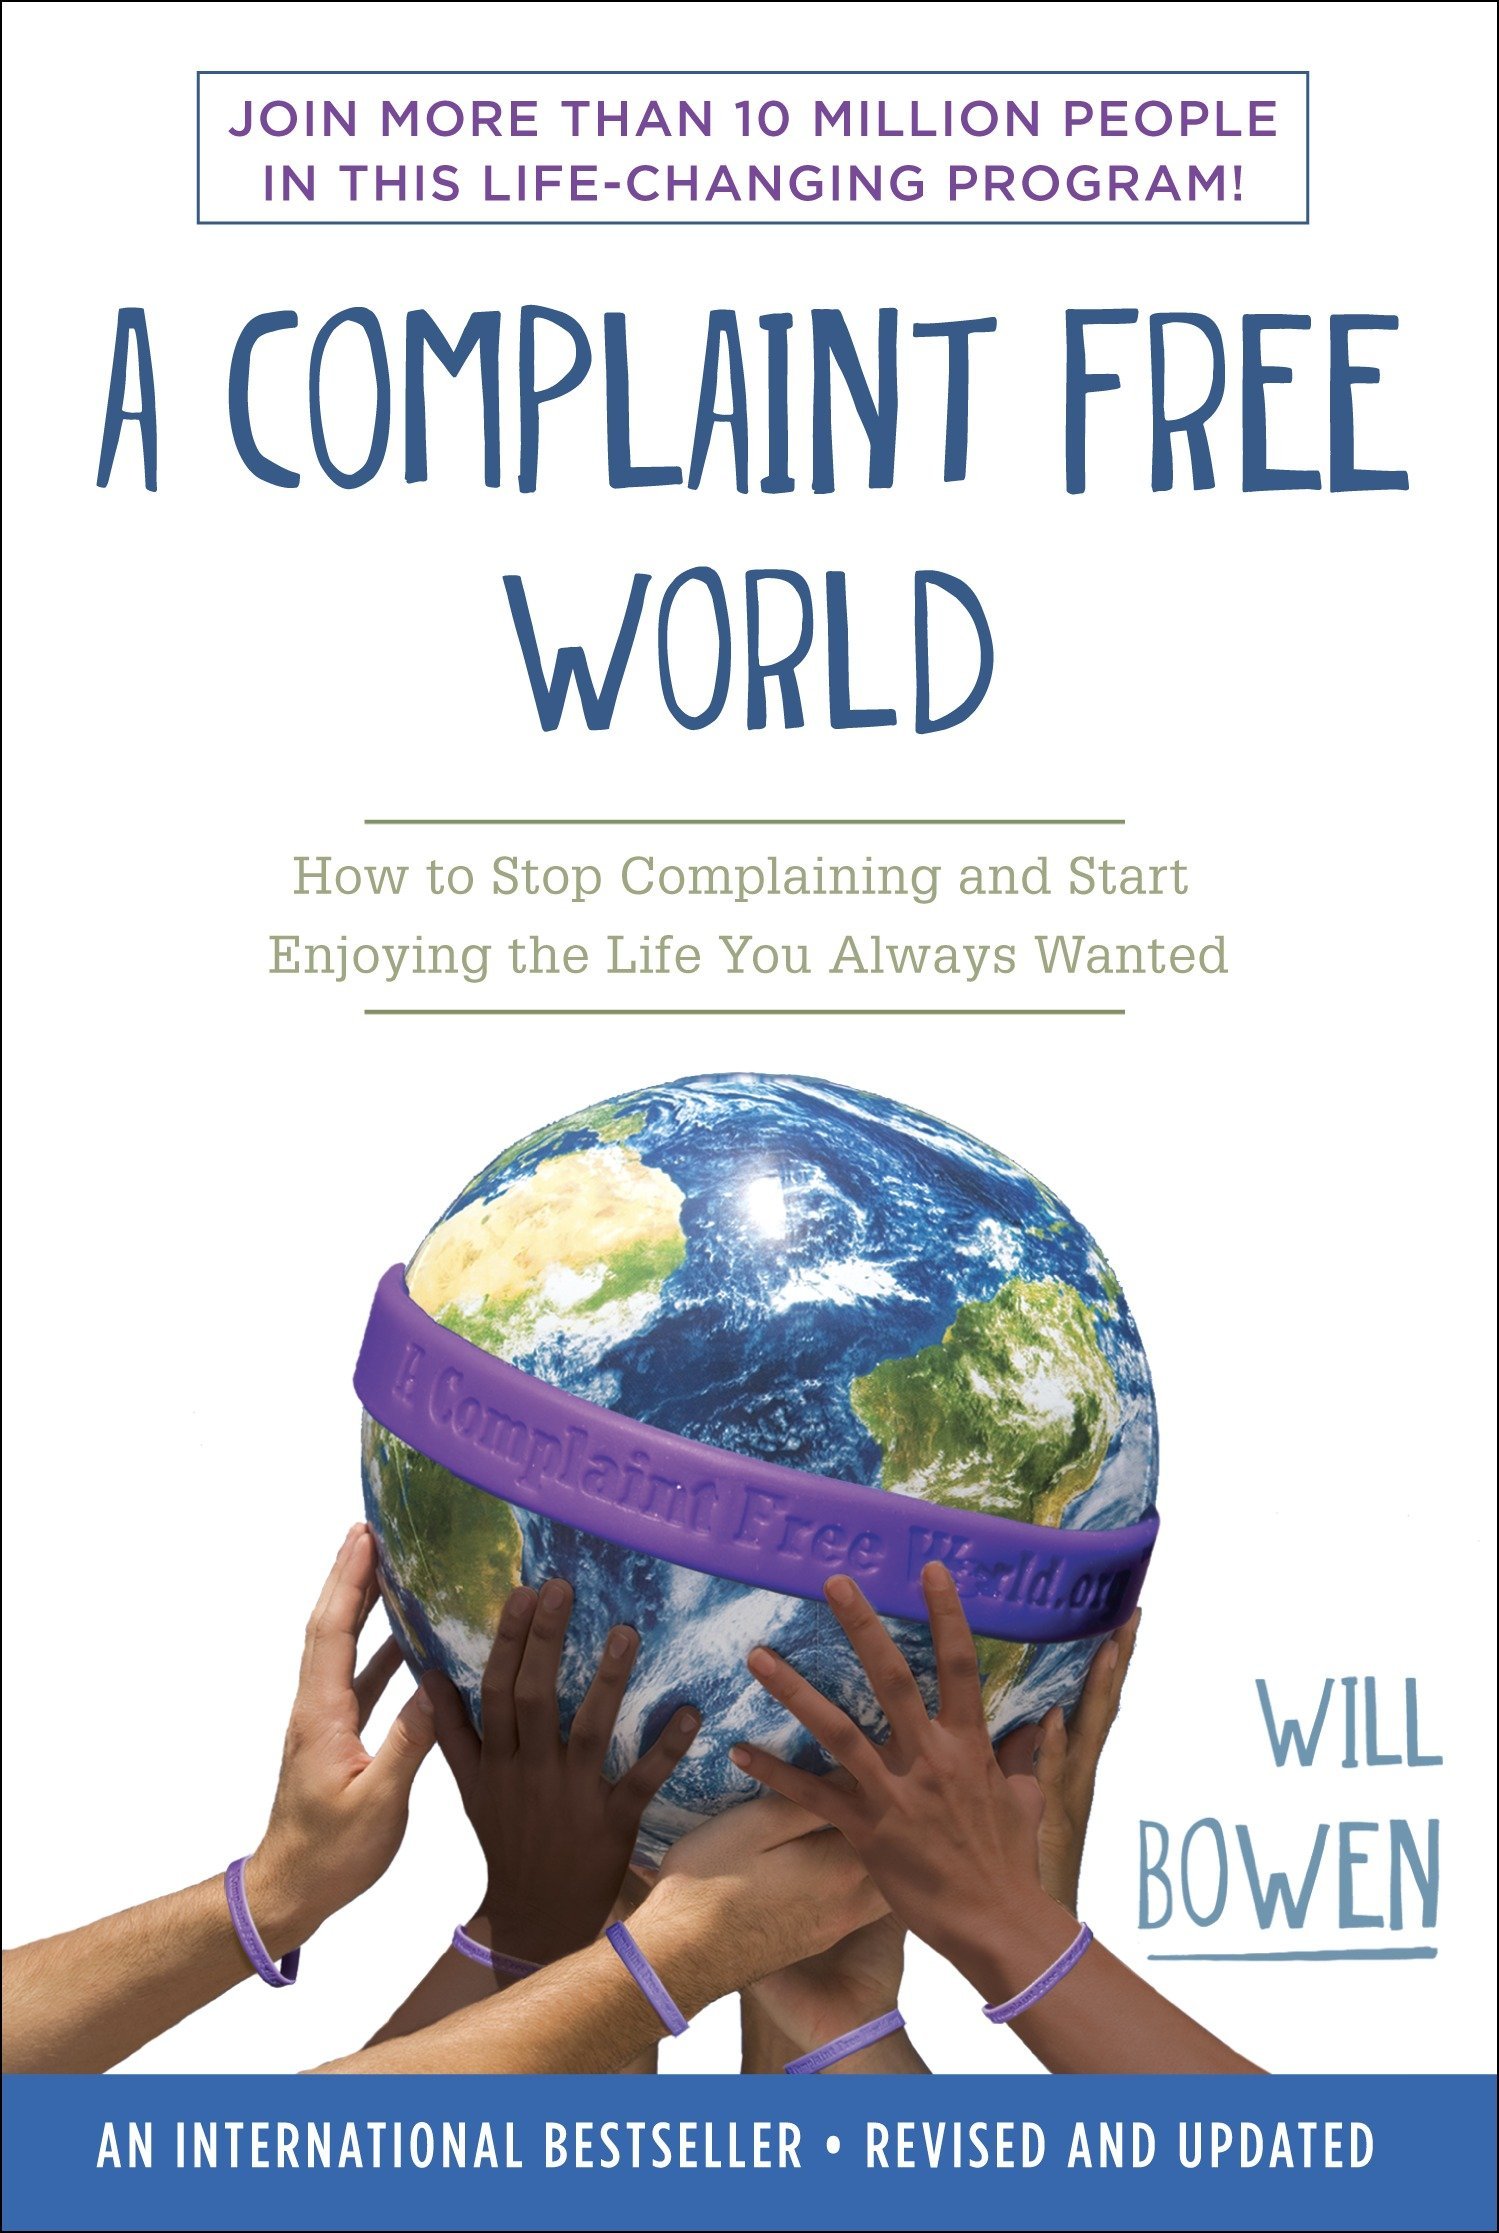 A Complaint Free World: How to Stop Complaining and Start Enjoying the Life You Always Wanted